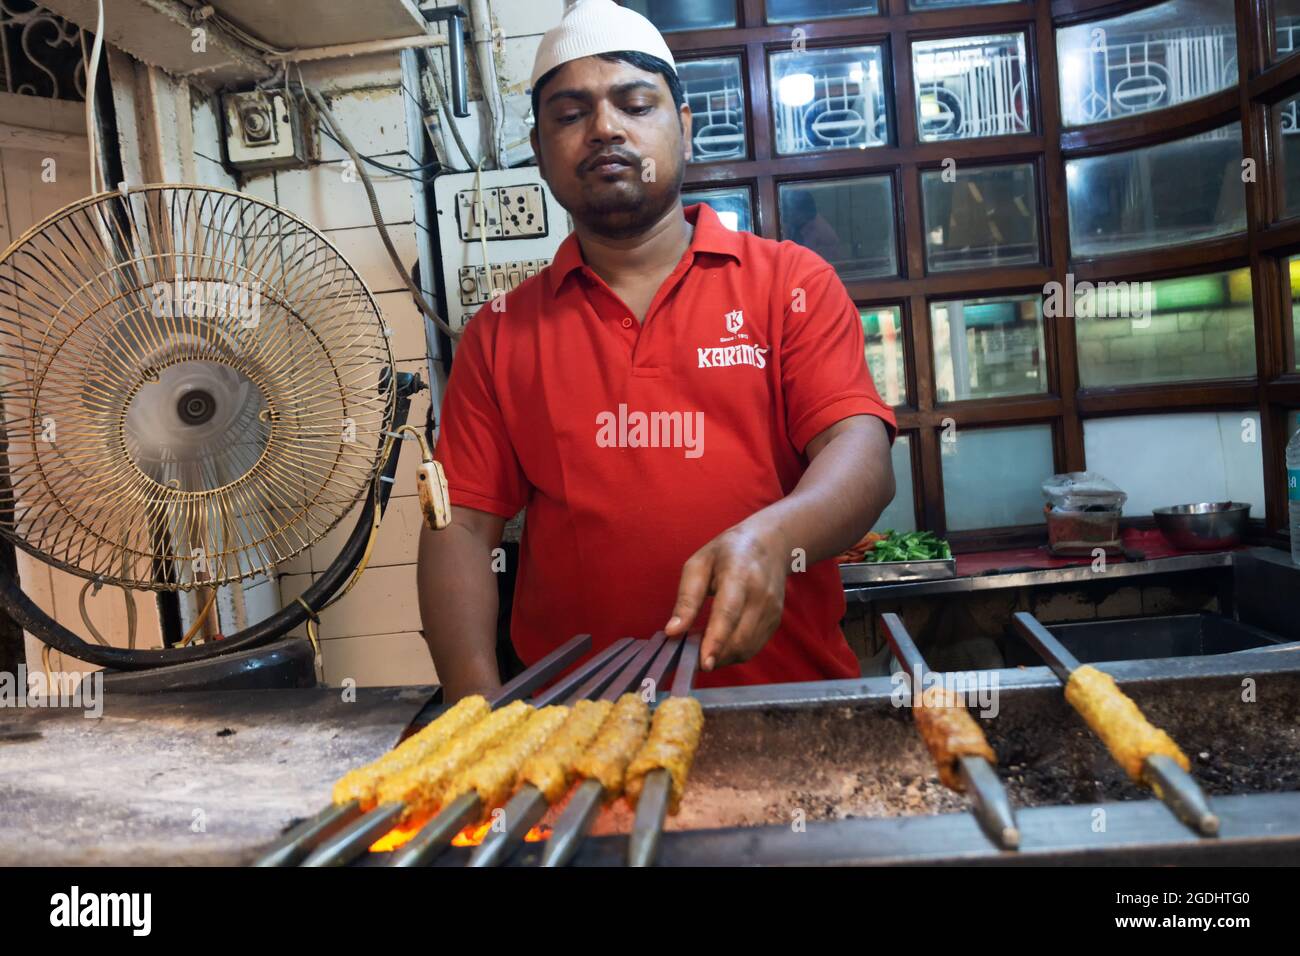 Old Delhi, India - March 4, 2018: Unidentified Man grilling an Indian Chicken and Mutton Kebabs at Chandni Chowk in Old Delhi India Stock Photo